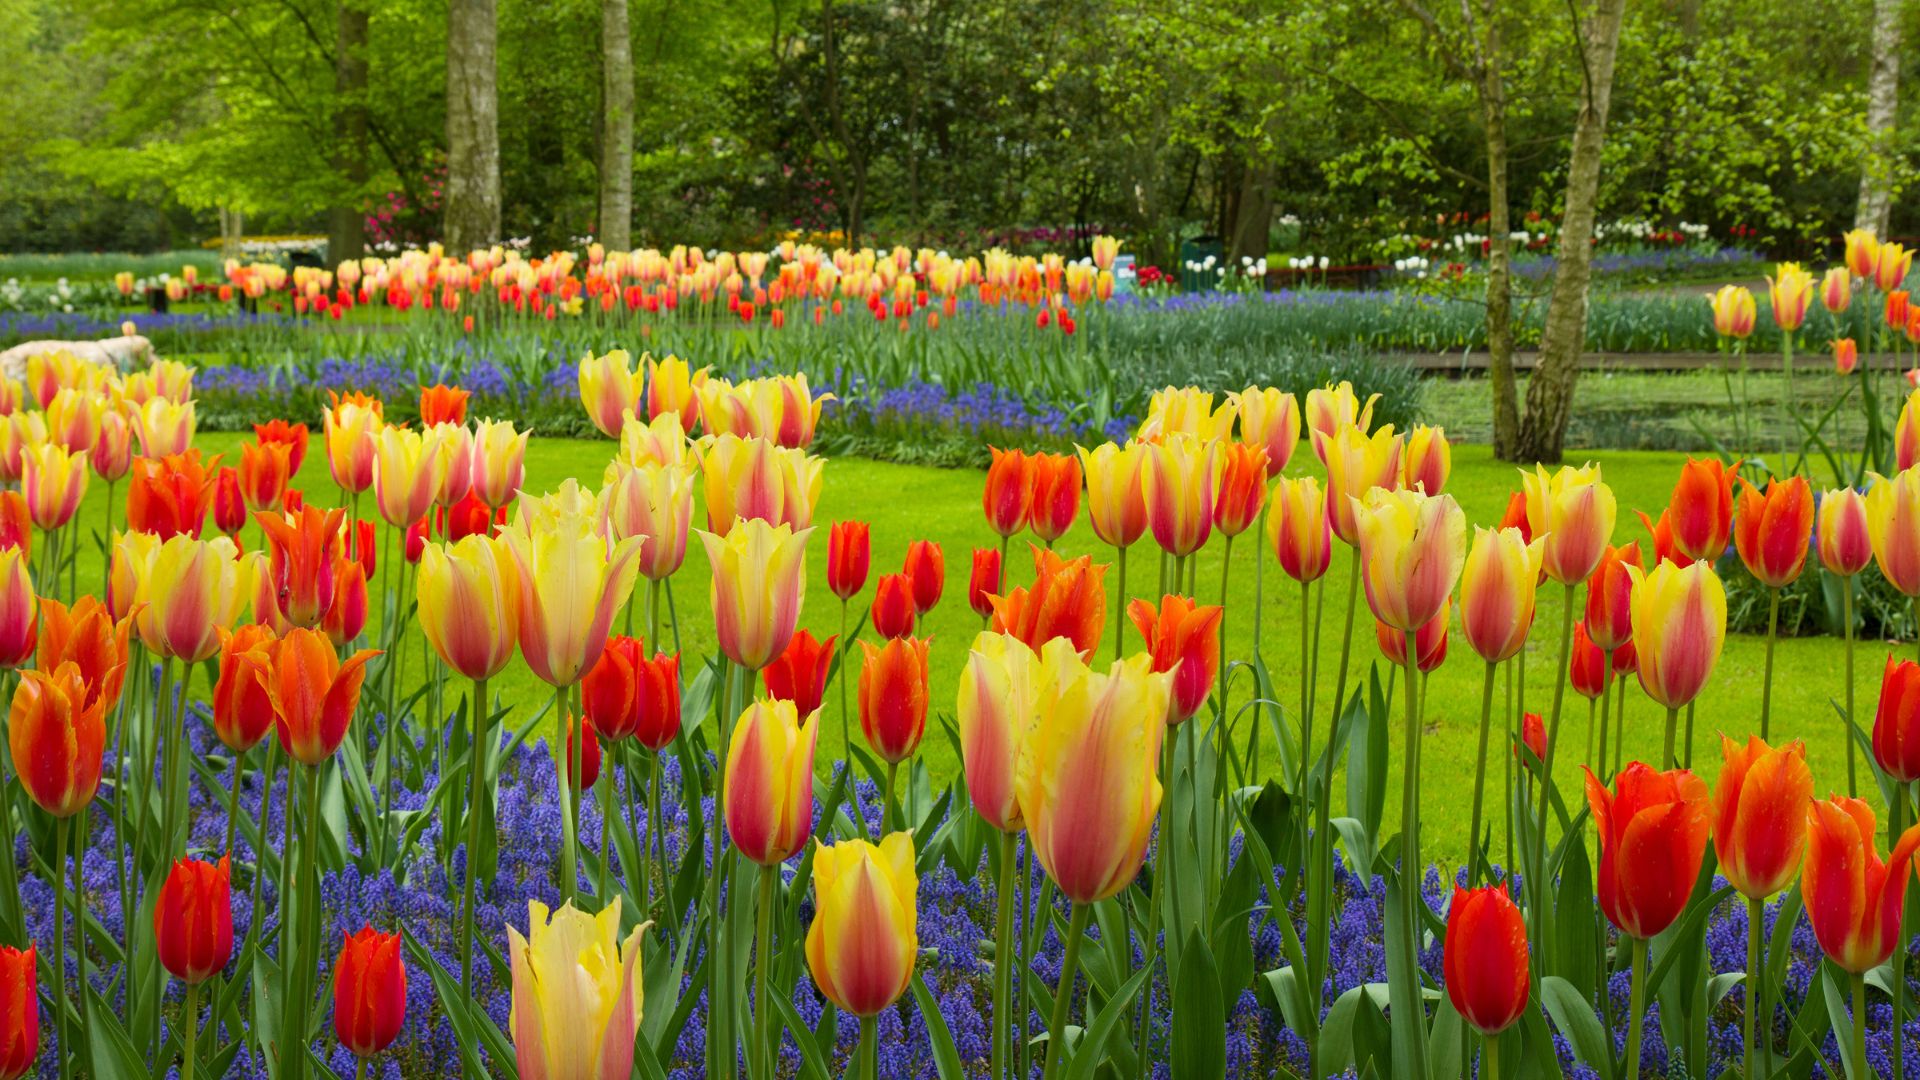 Garden of tulips and other spring flowers